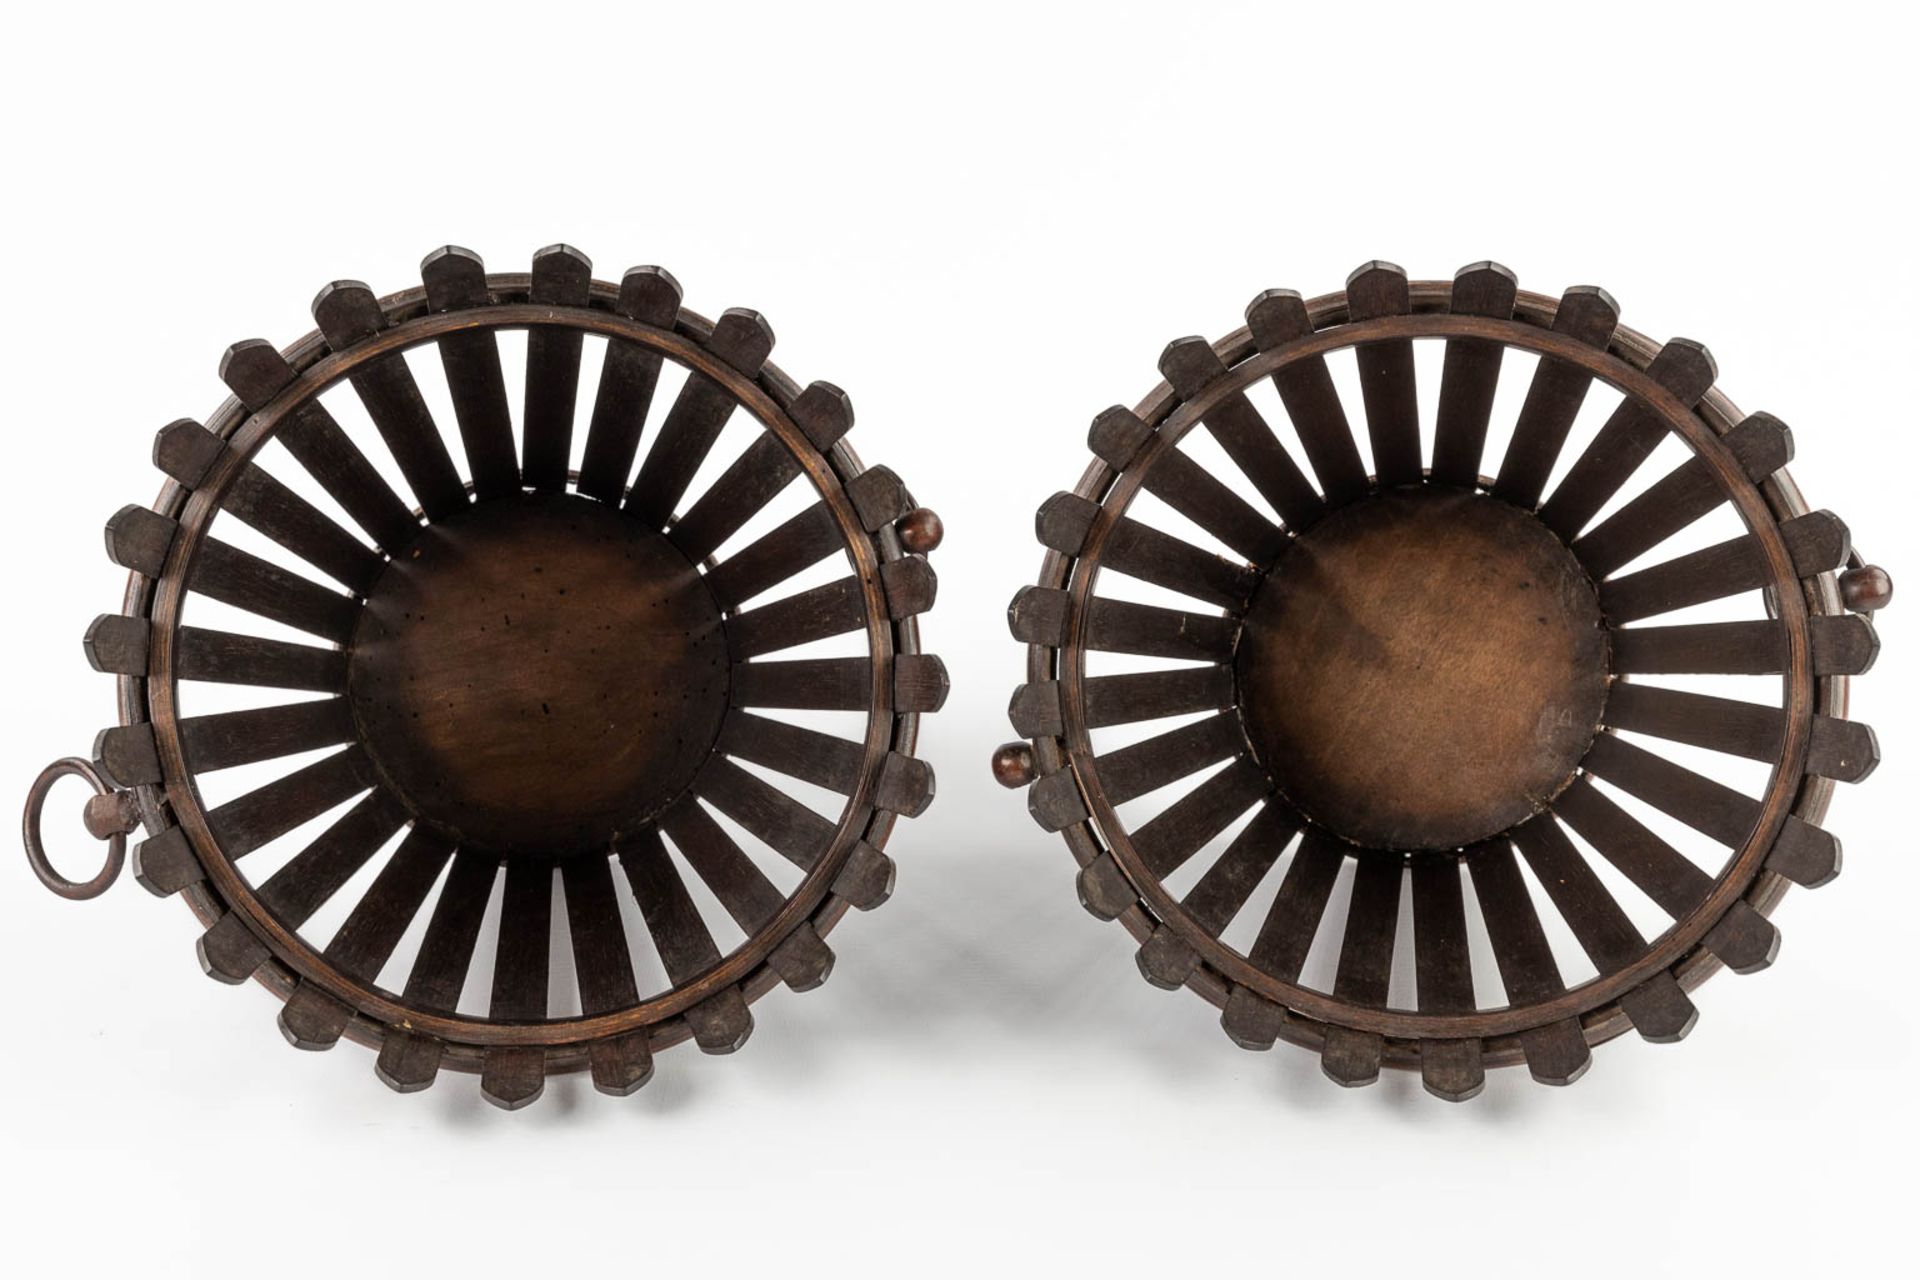 A pair of Edwardian flower baskets, mahogany, England. (H:21 x D:23 cm) - Image 9 of 11